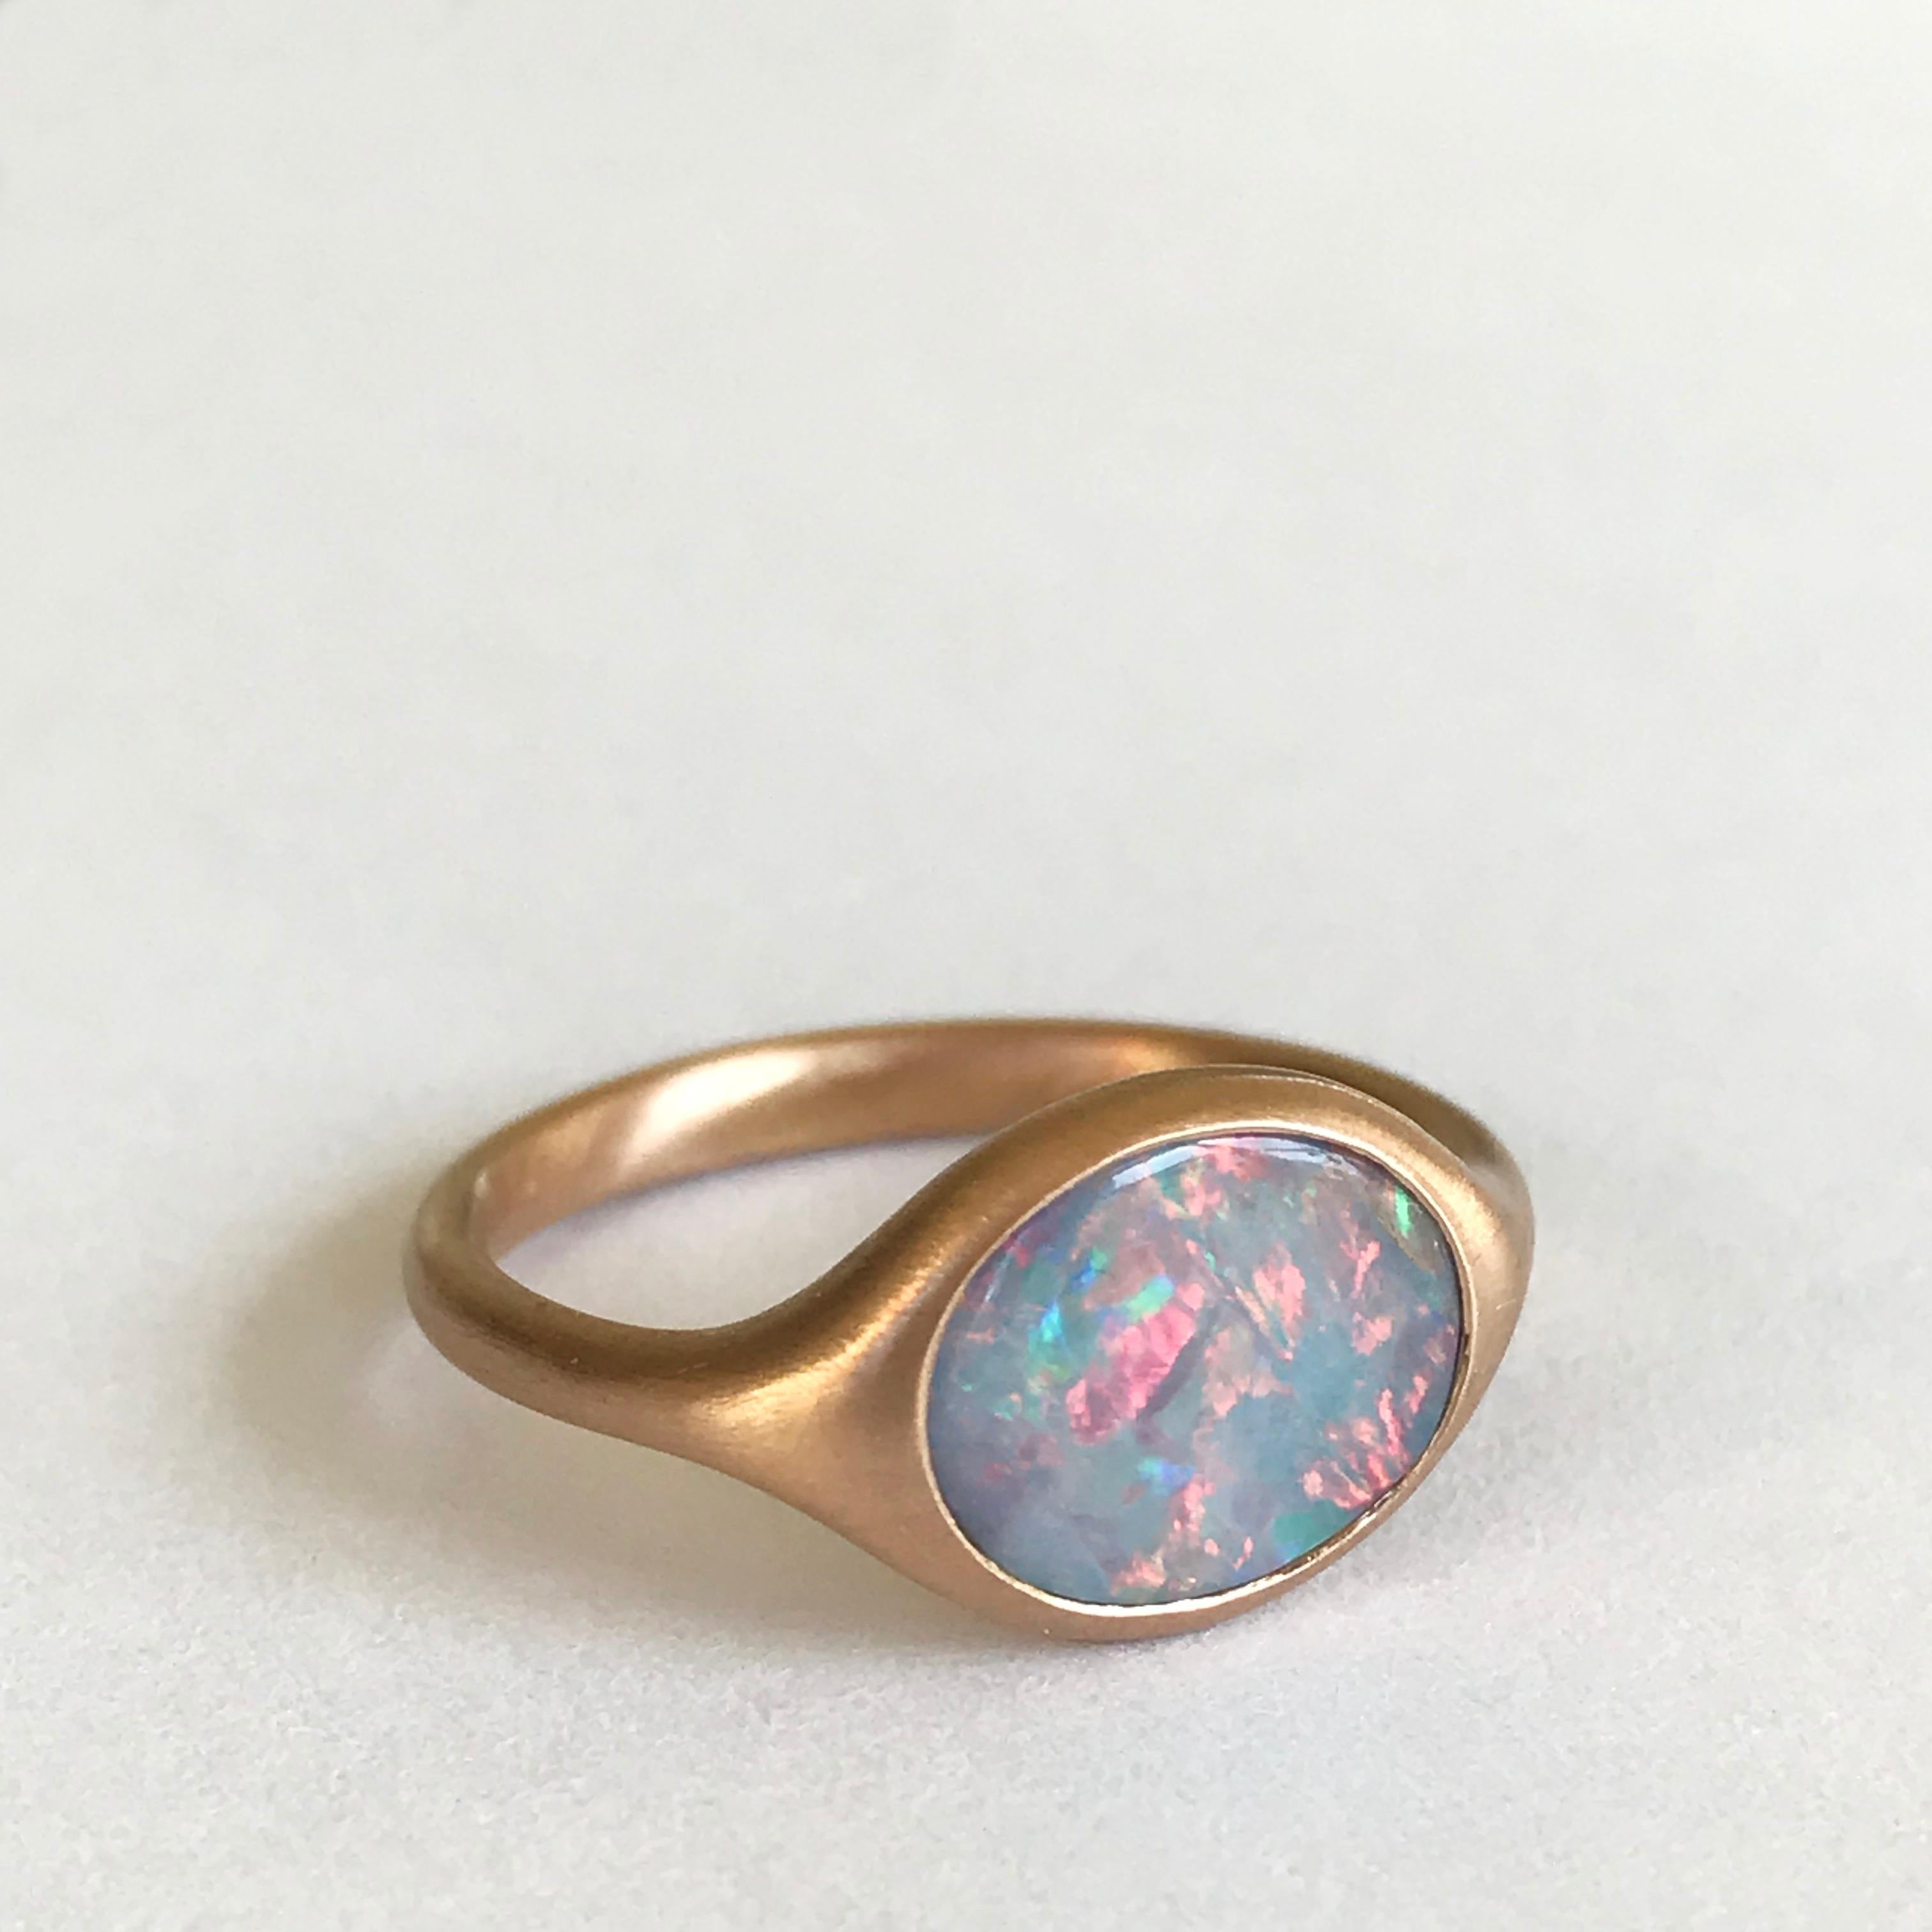 Dalben design 18k yellow gold semilucid finishing ring with a 1,48 carat bezel-set small oval cabochon Australian Opal . 
Ring size 5 3/4 - EU 51 re-sizable to most finger sizes. 
Opal dìimension : 10 x 8 mm 
Bezel setting dimension: 
width 11,6 mm,